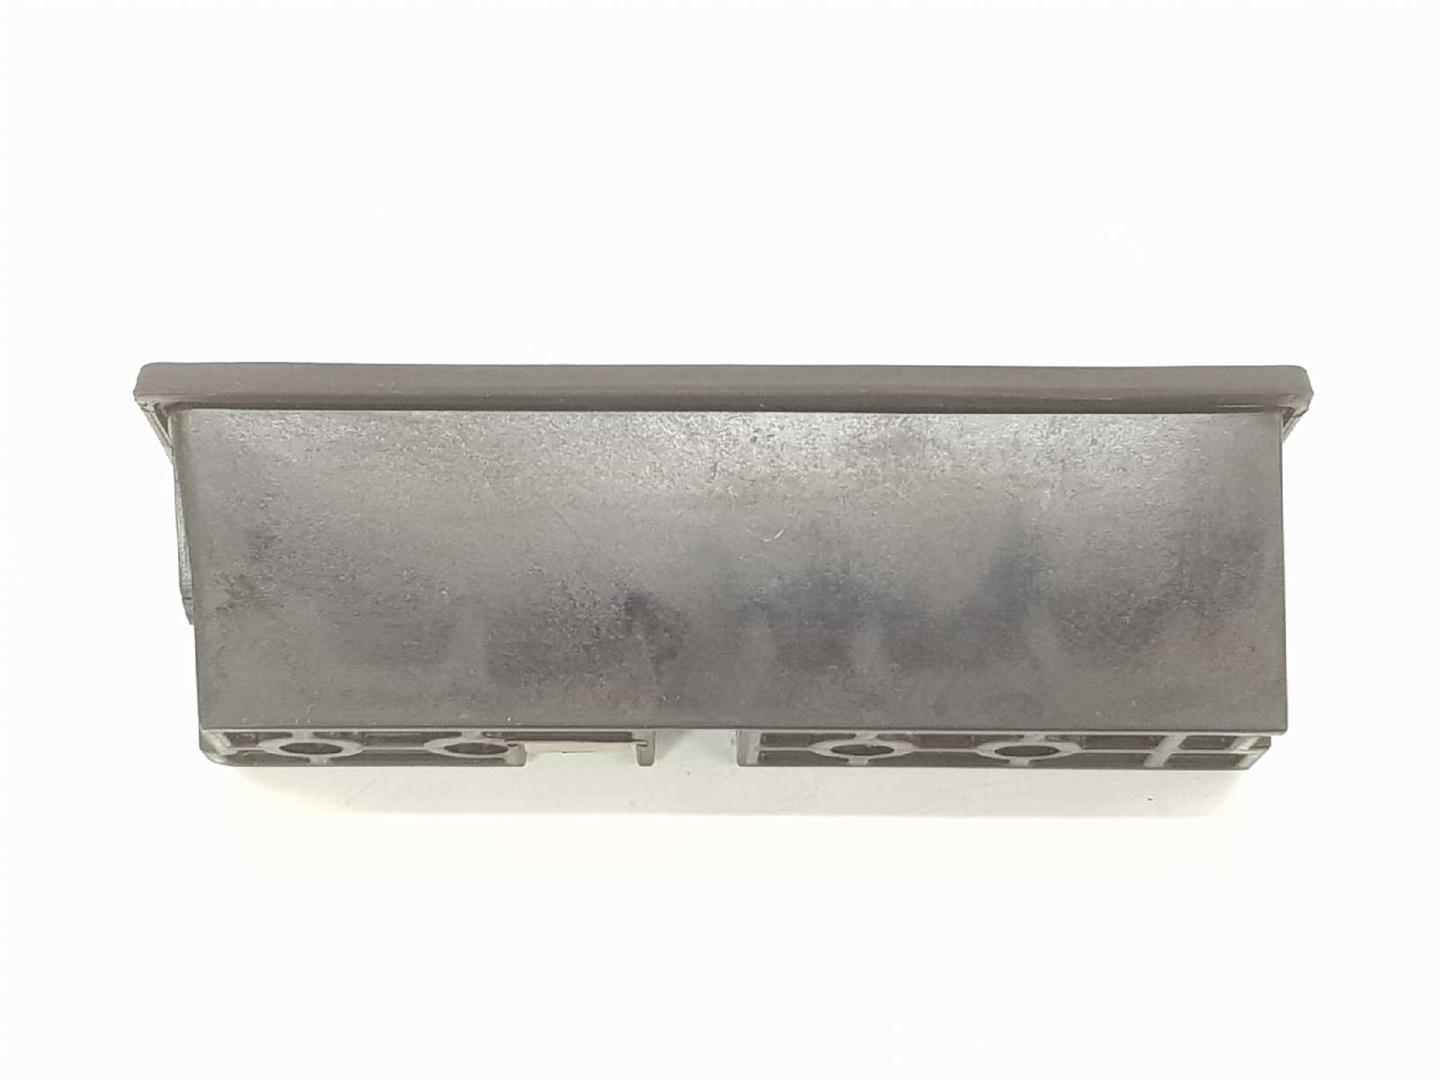 AUDI A6 C6/4F (2004-2011) Other Body Parts 8P4827574, 8P4827574 19745652